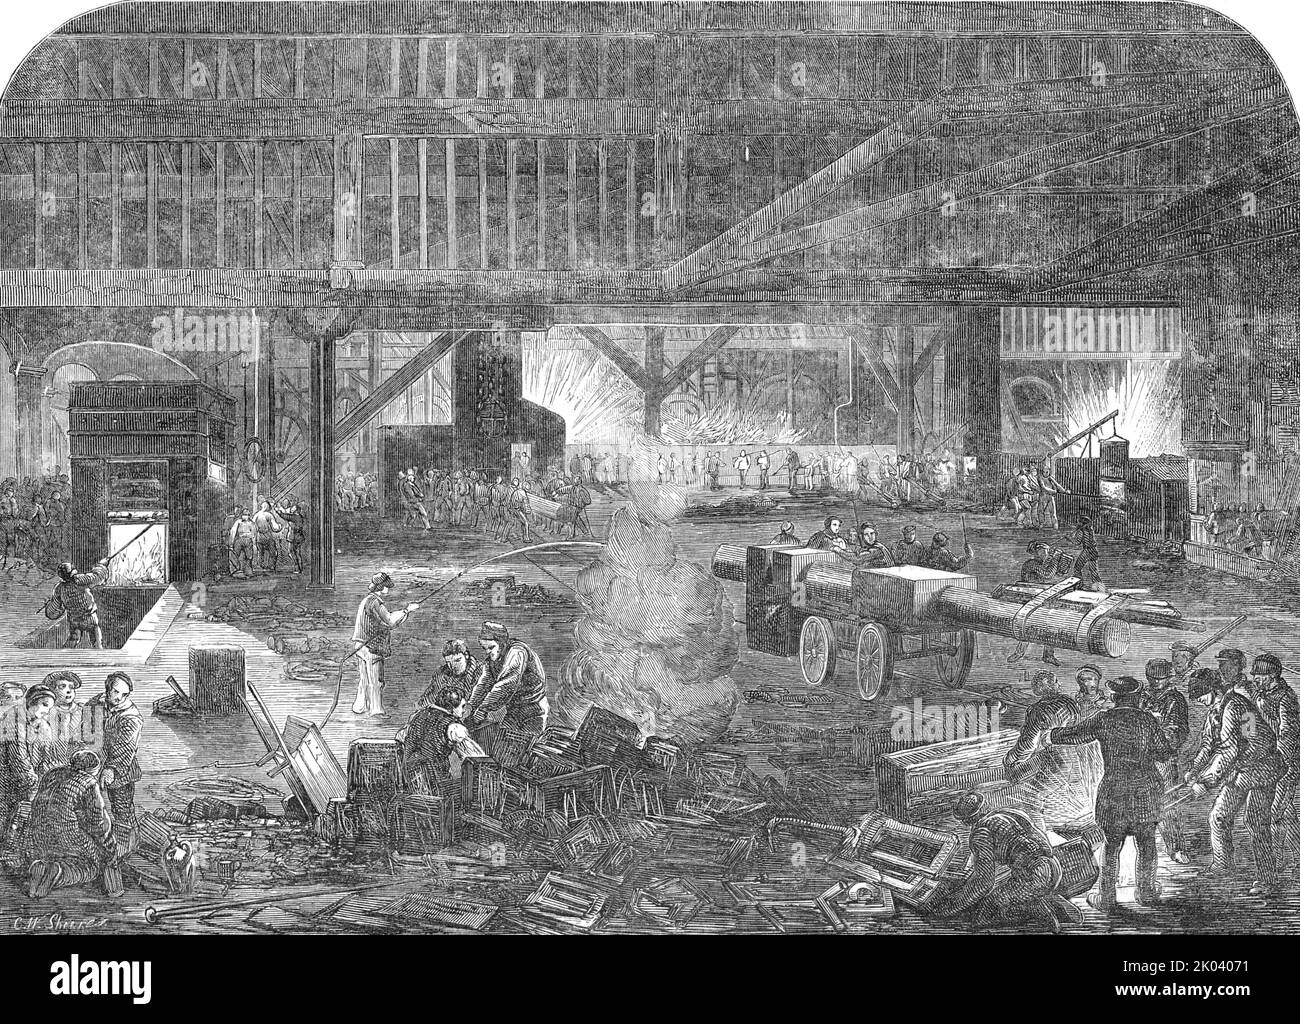 Mare and Co.'s Iron Ship-Building Works, 1854. Shipyard on the River Thames in London during the Crimean War, an '... industrial army of between 3000 and 4000 hands, busily engaged in the construction of vessels, not only to meet the exigencies of the war, but also the demands of our increased trade...It is almost bewildering to pass amongst the numerous punching and shearing machines, moved by steam power, cutting and piercing thick iron as readily as if it were writing paper...In this yard some of the most powerful machinery is in motion: numerous furnaces are in active operation, heating an Stock Photo